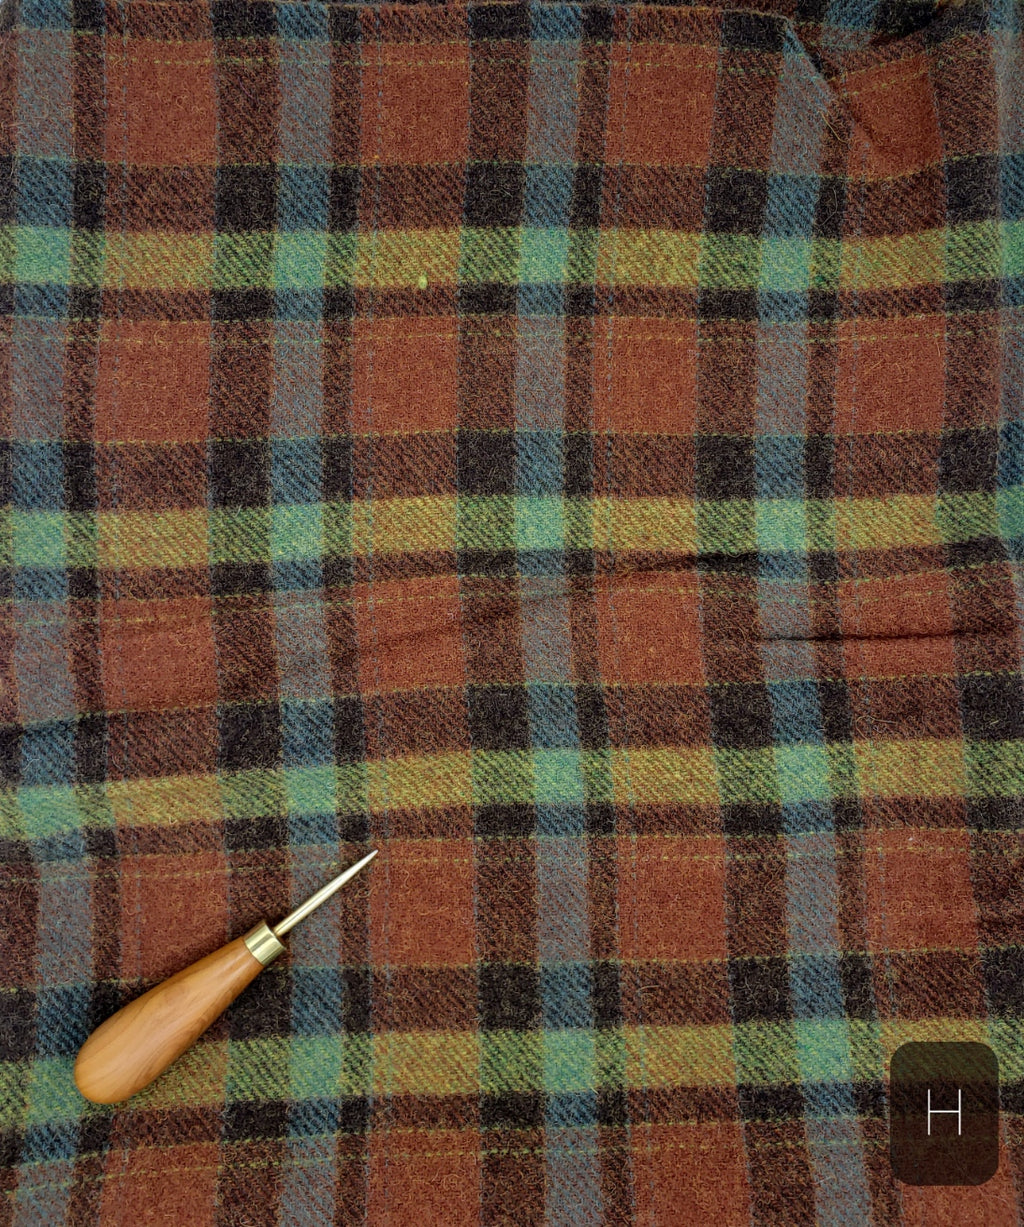 RED GREEN PLAID #281H - FAT QUARTER - Ready to use Wool Fabric for Rug Hooking or Wool Applique